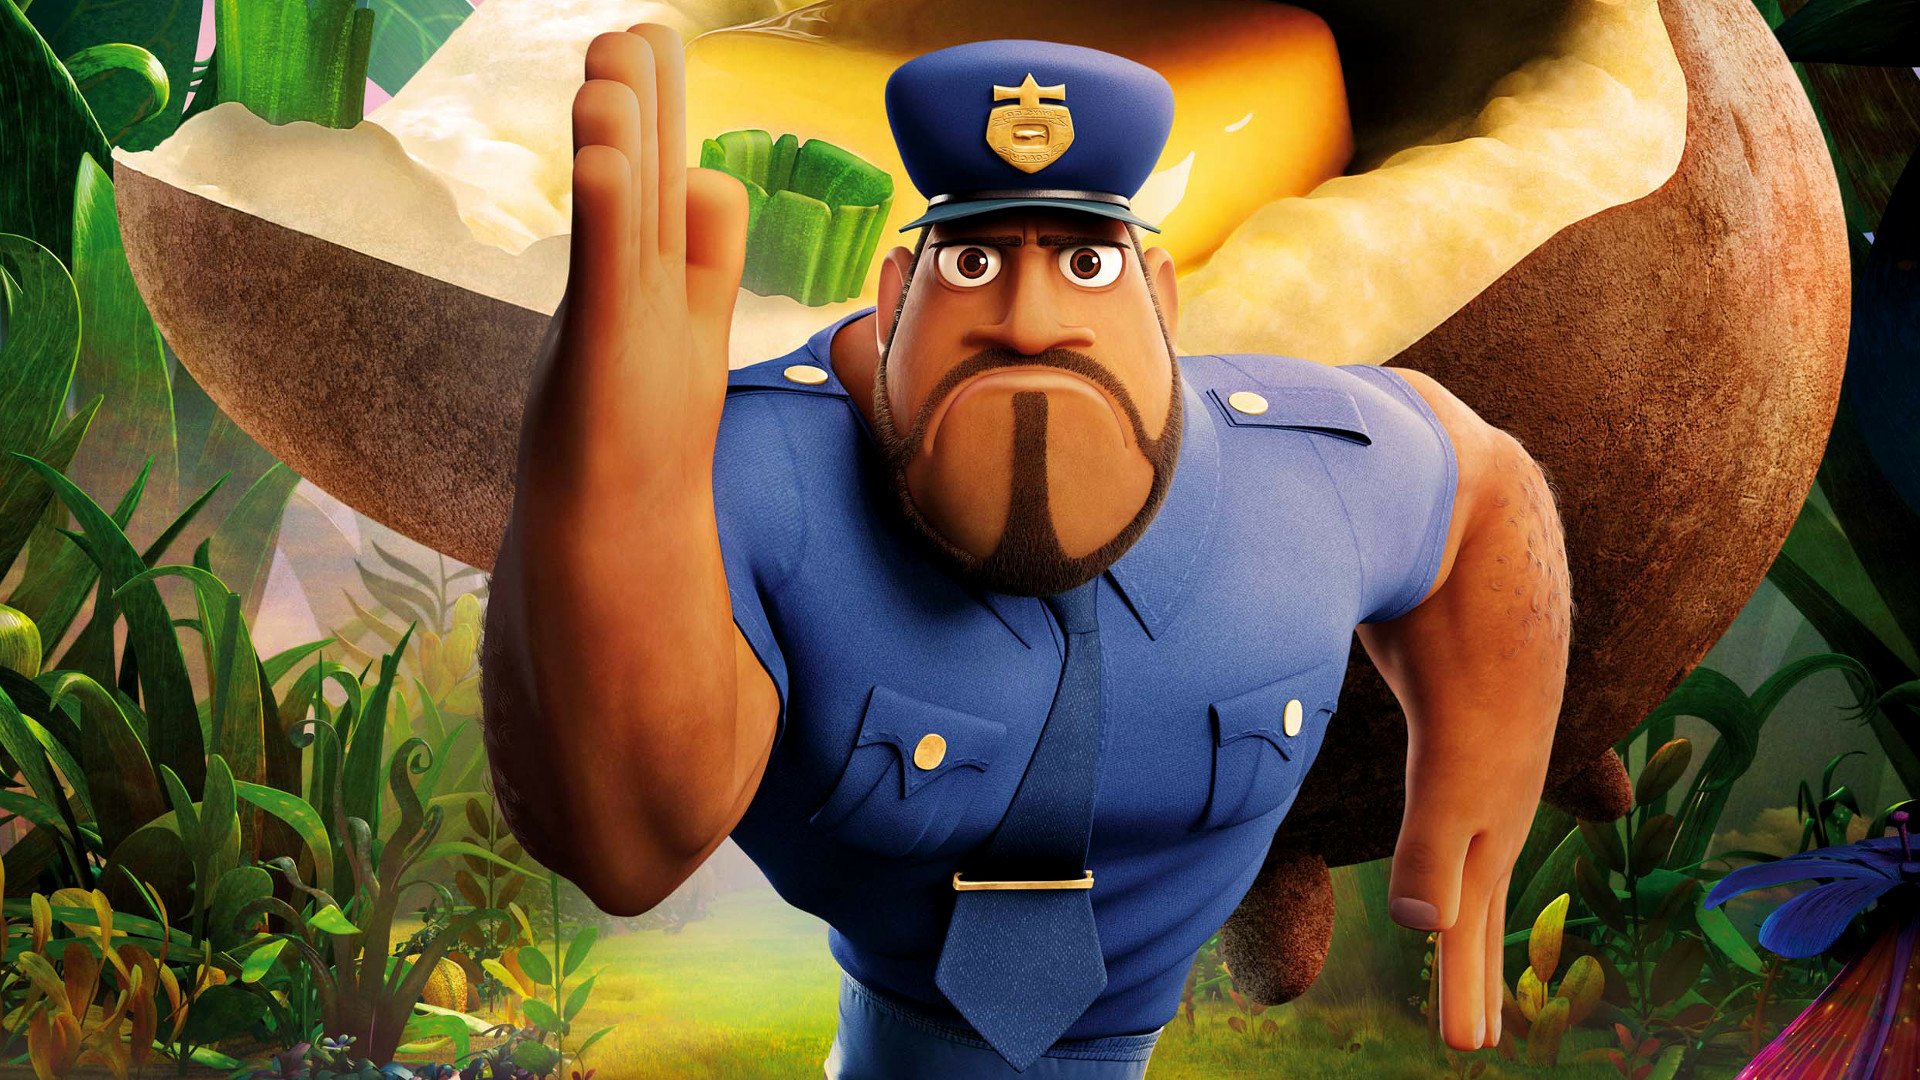 Cloudy With A Chance Of Meatballs 2 HD Wallpaper. 